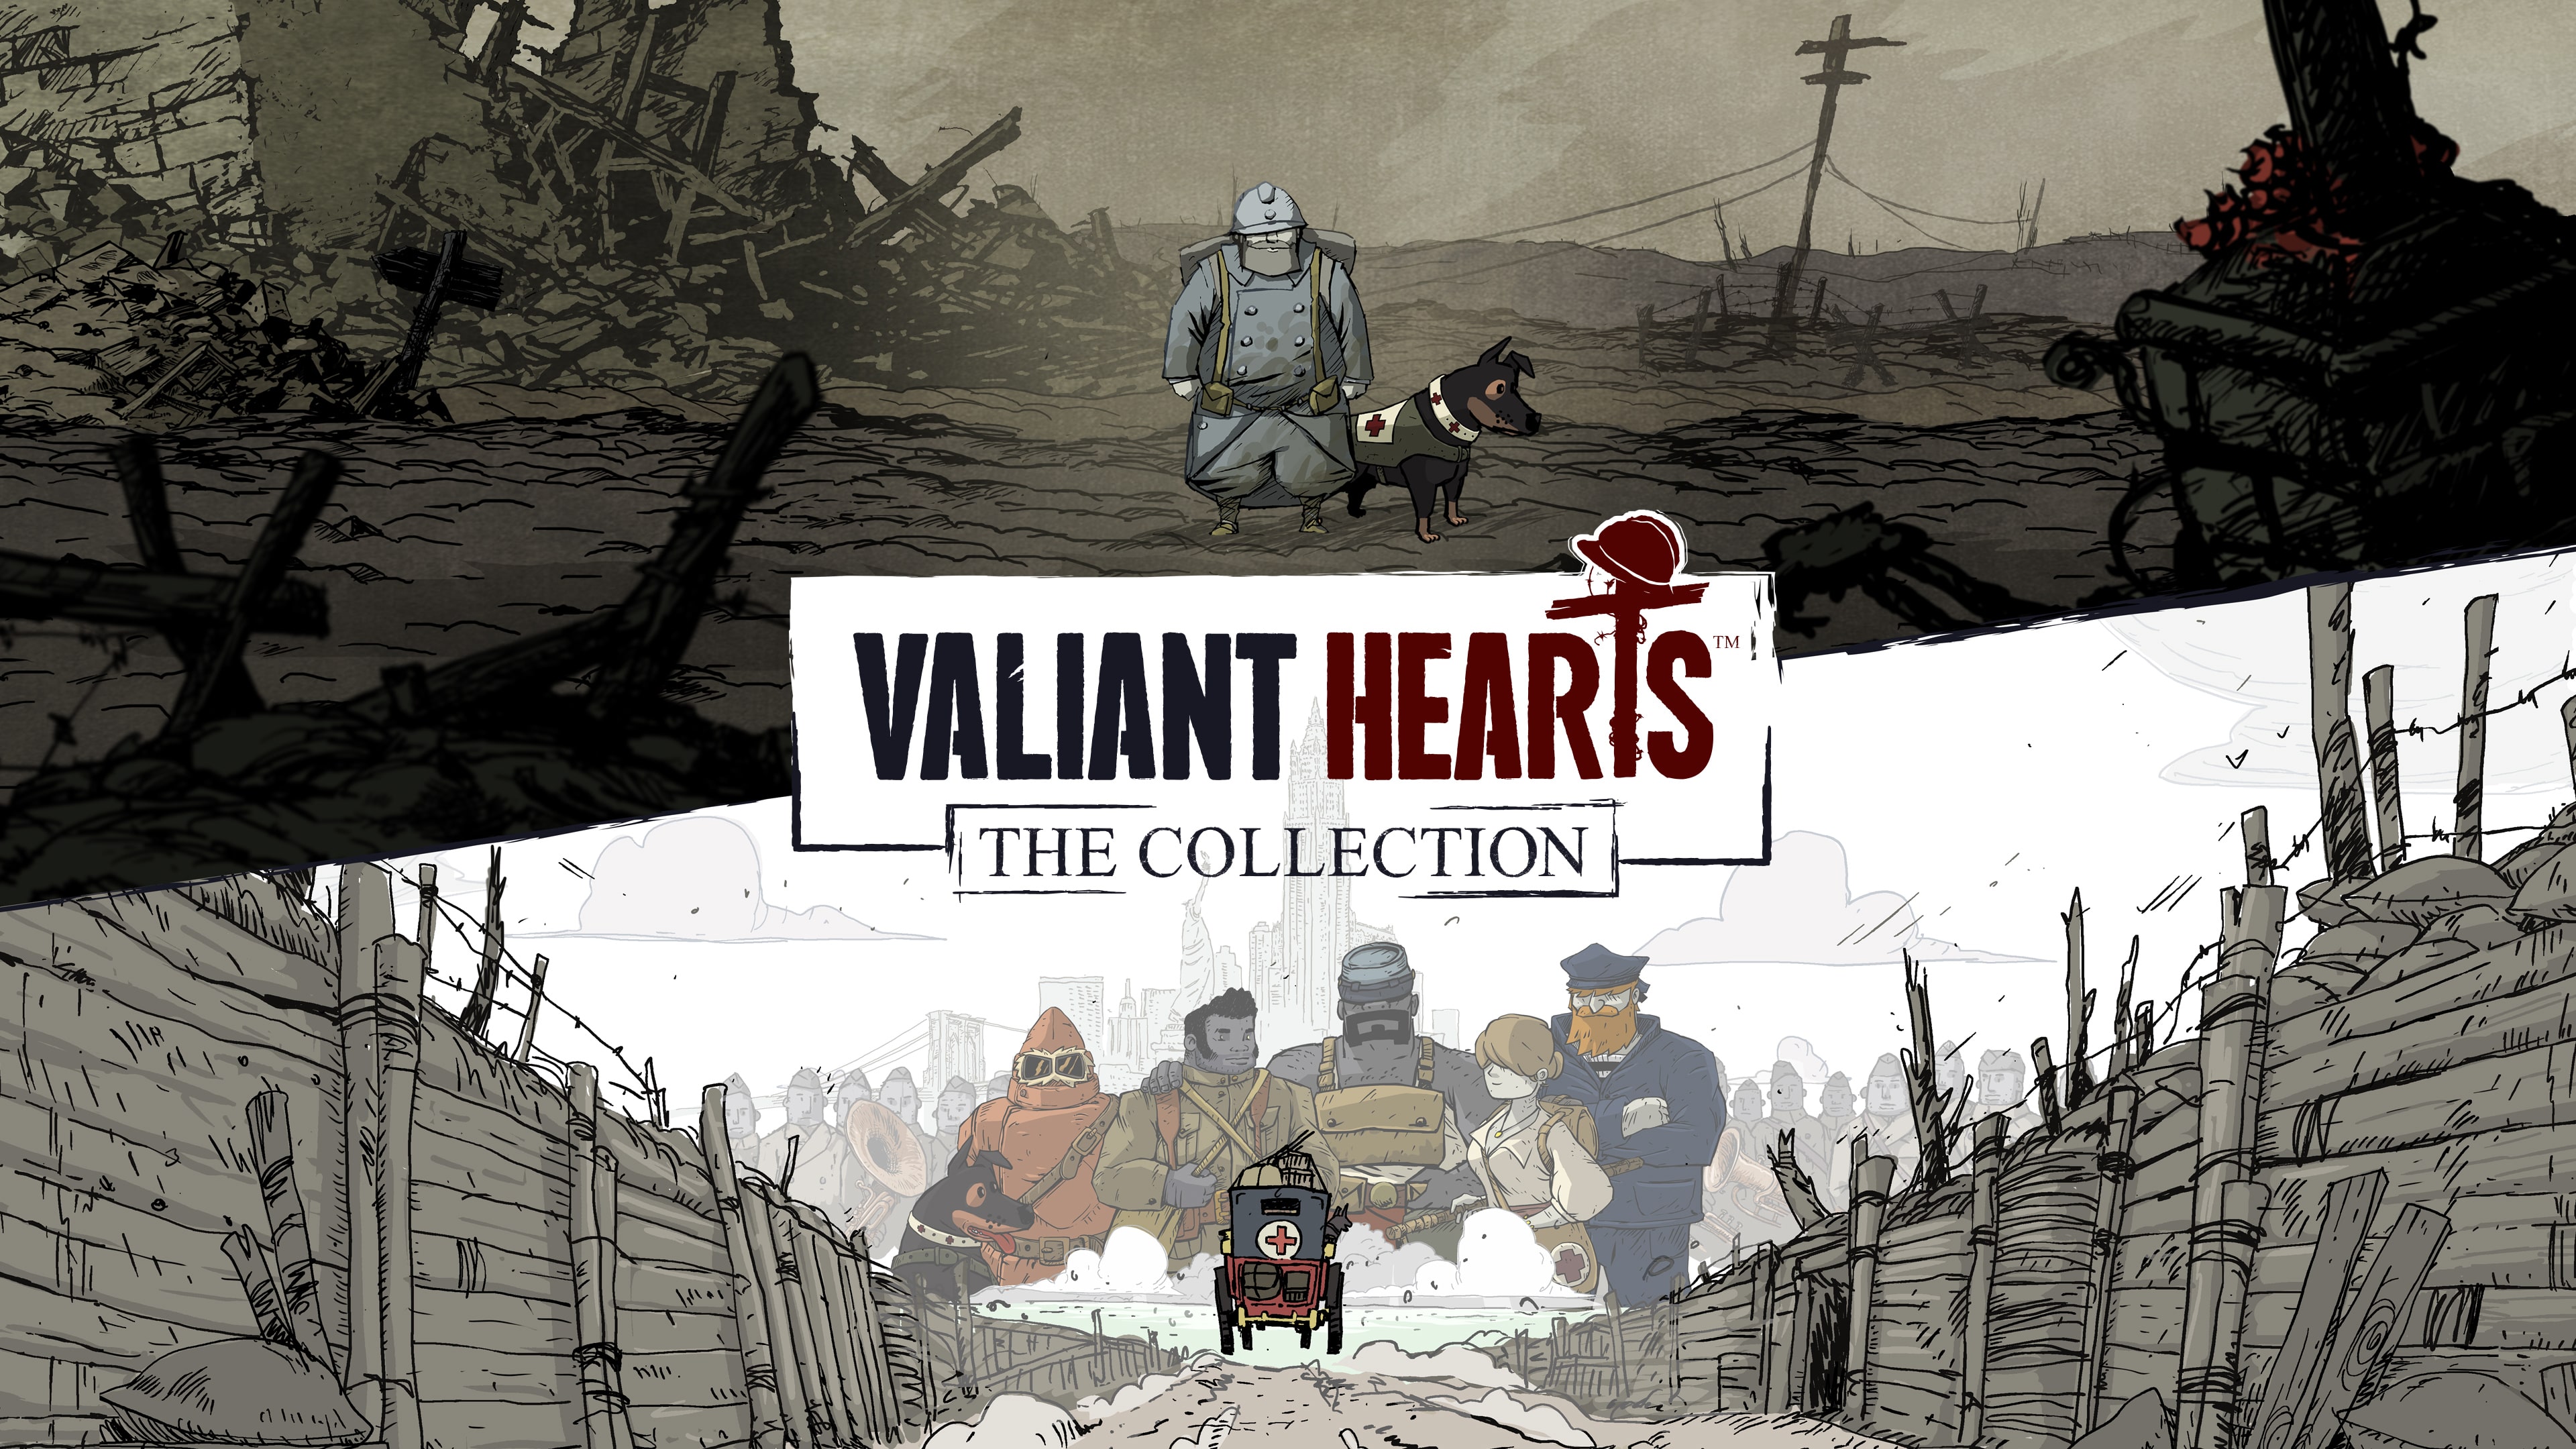 Valiant Hearts: The Collection (Simplified Chinese, English, Korean, Thai, Japanese, Traditional Chinese)